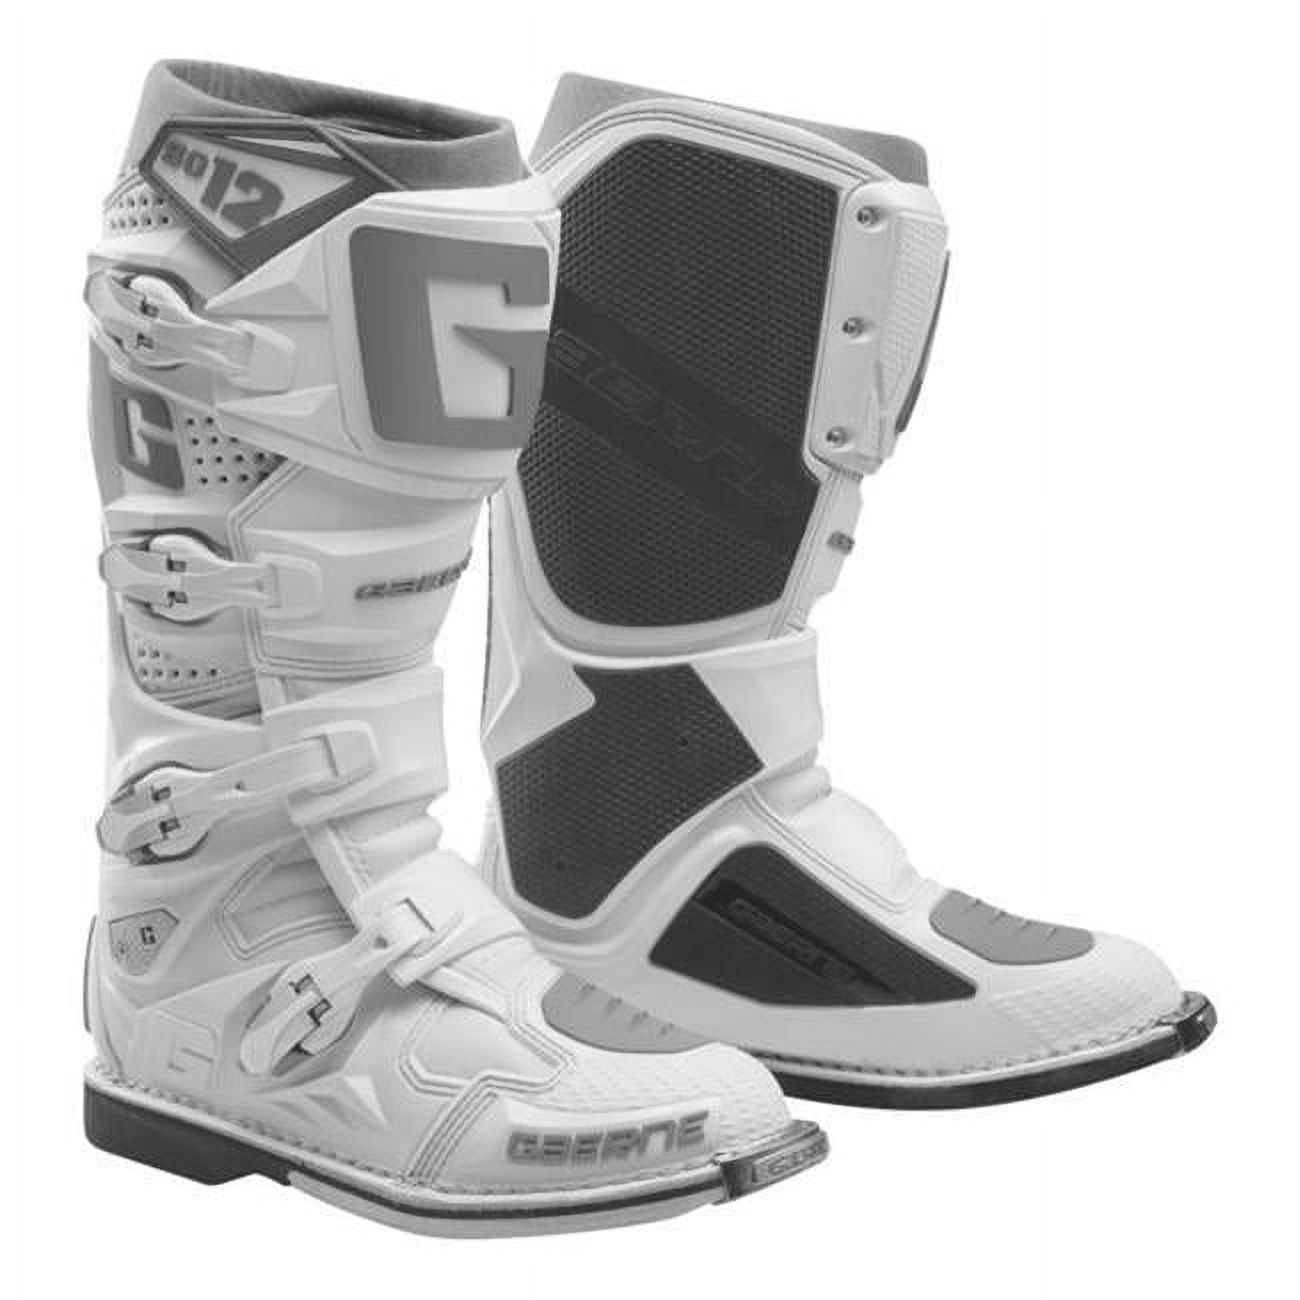 Gaerne SG12 Mens MX Offroad Boots White/Silver 13 USA - image 1 of 9